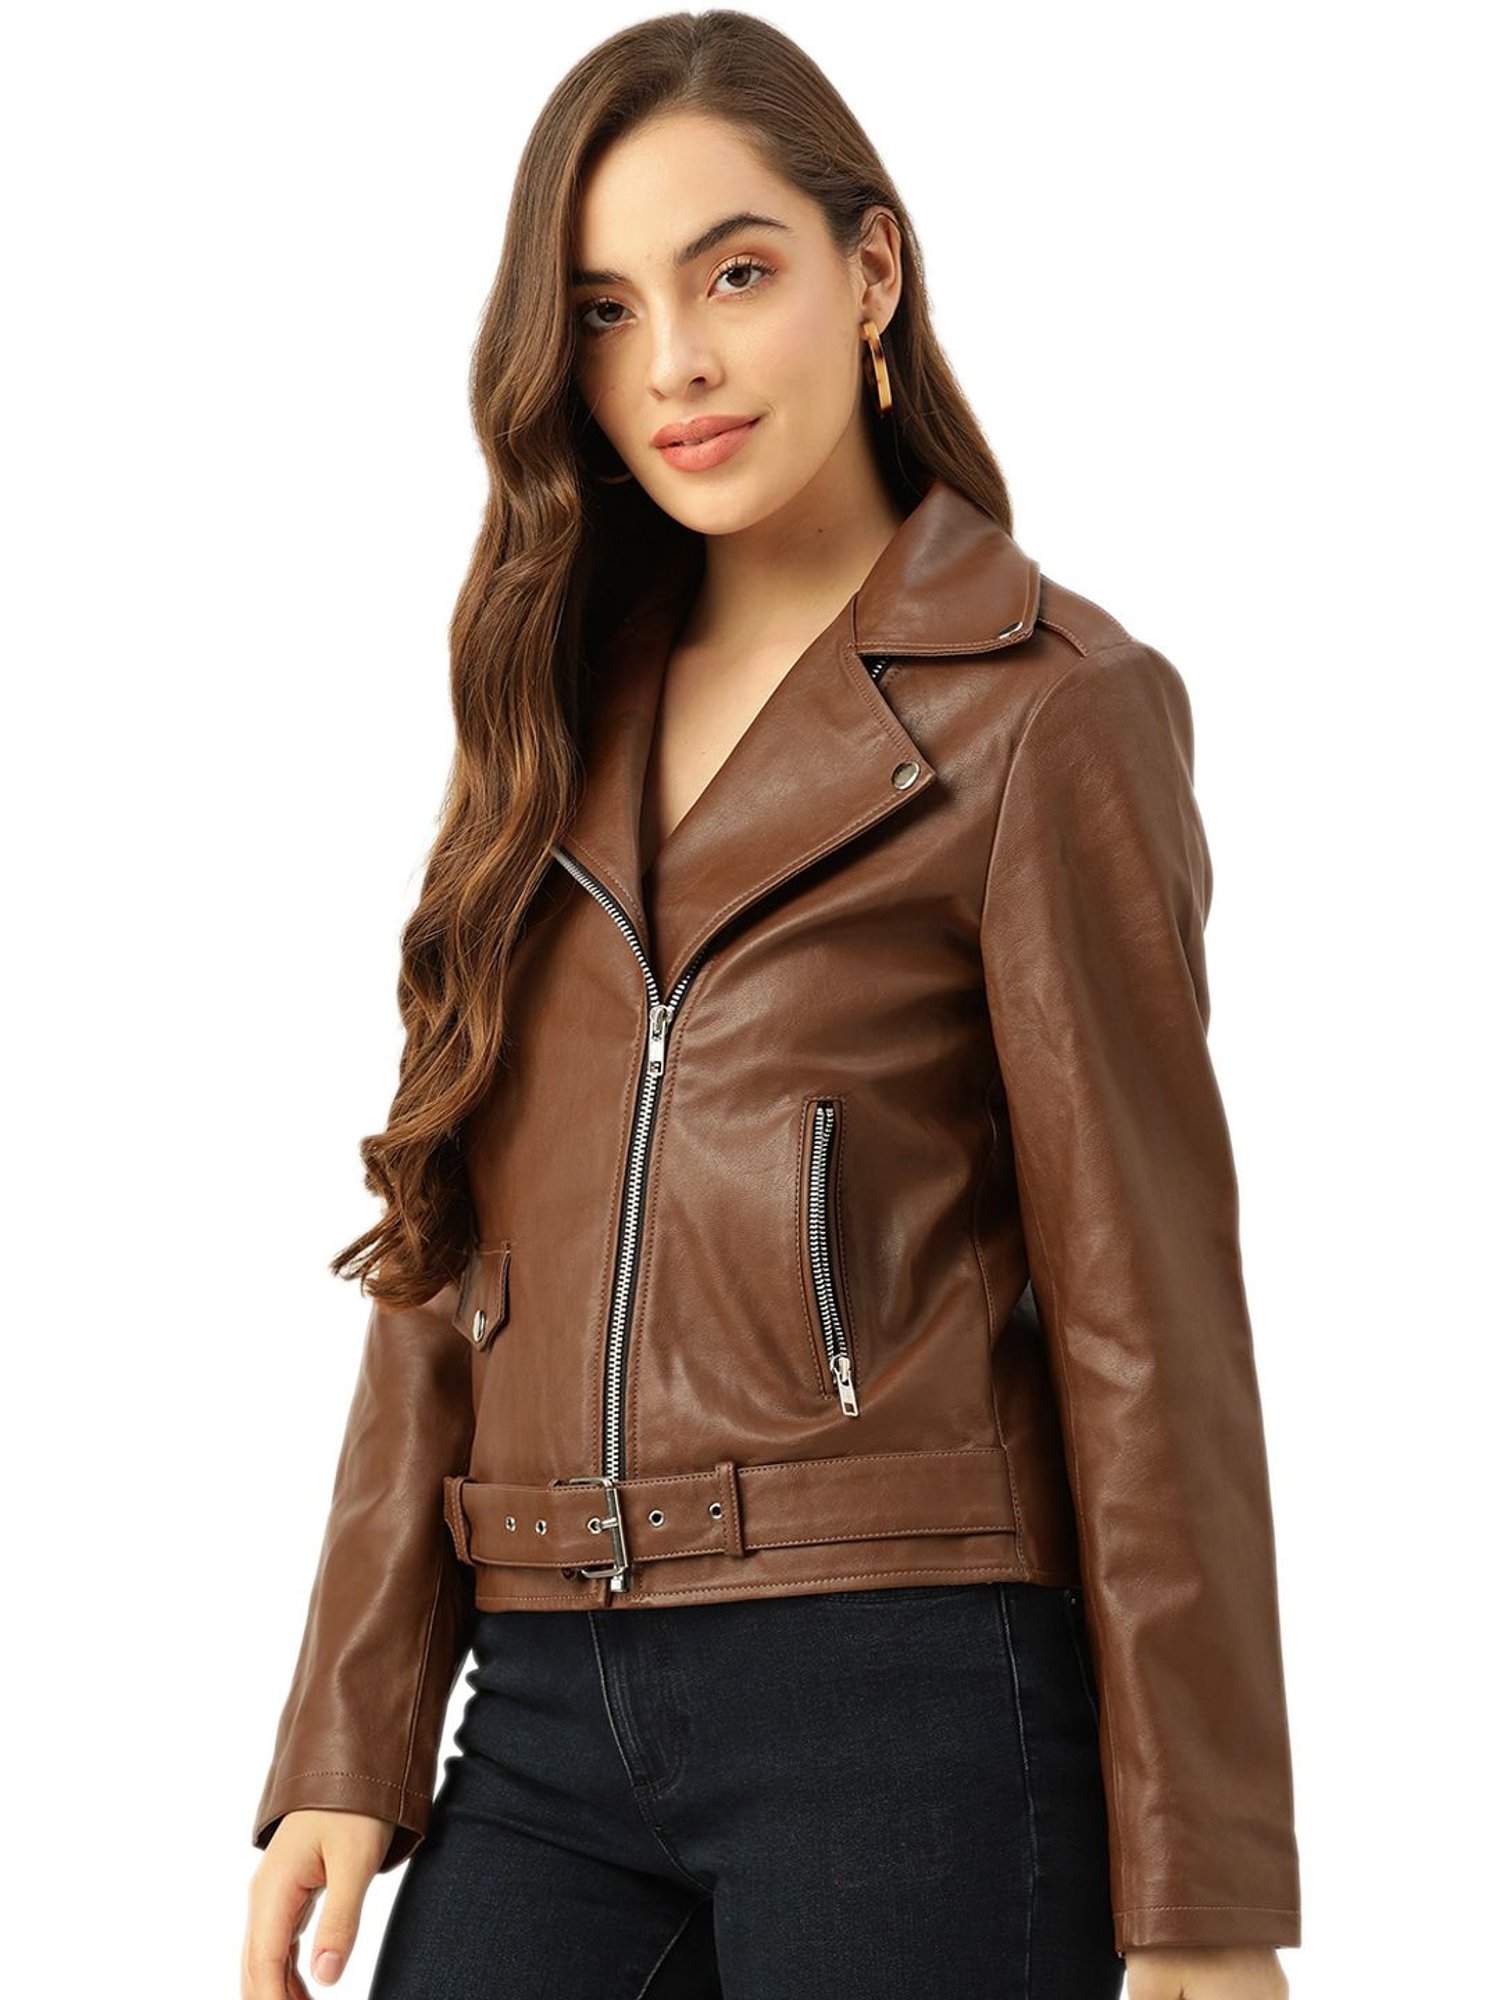 Suede Leather Jacket for Women / Brown Suede Leather Jacket for Women /  Brown Biker Style Suede Leather Jacket - Etsy